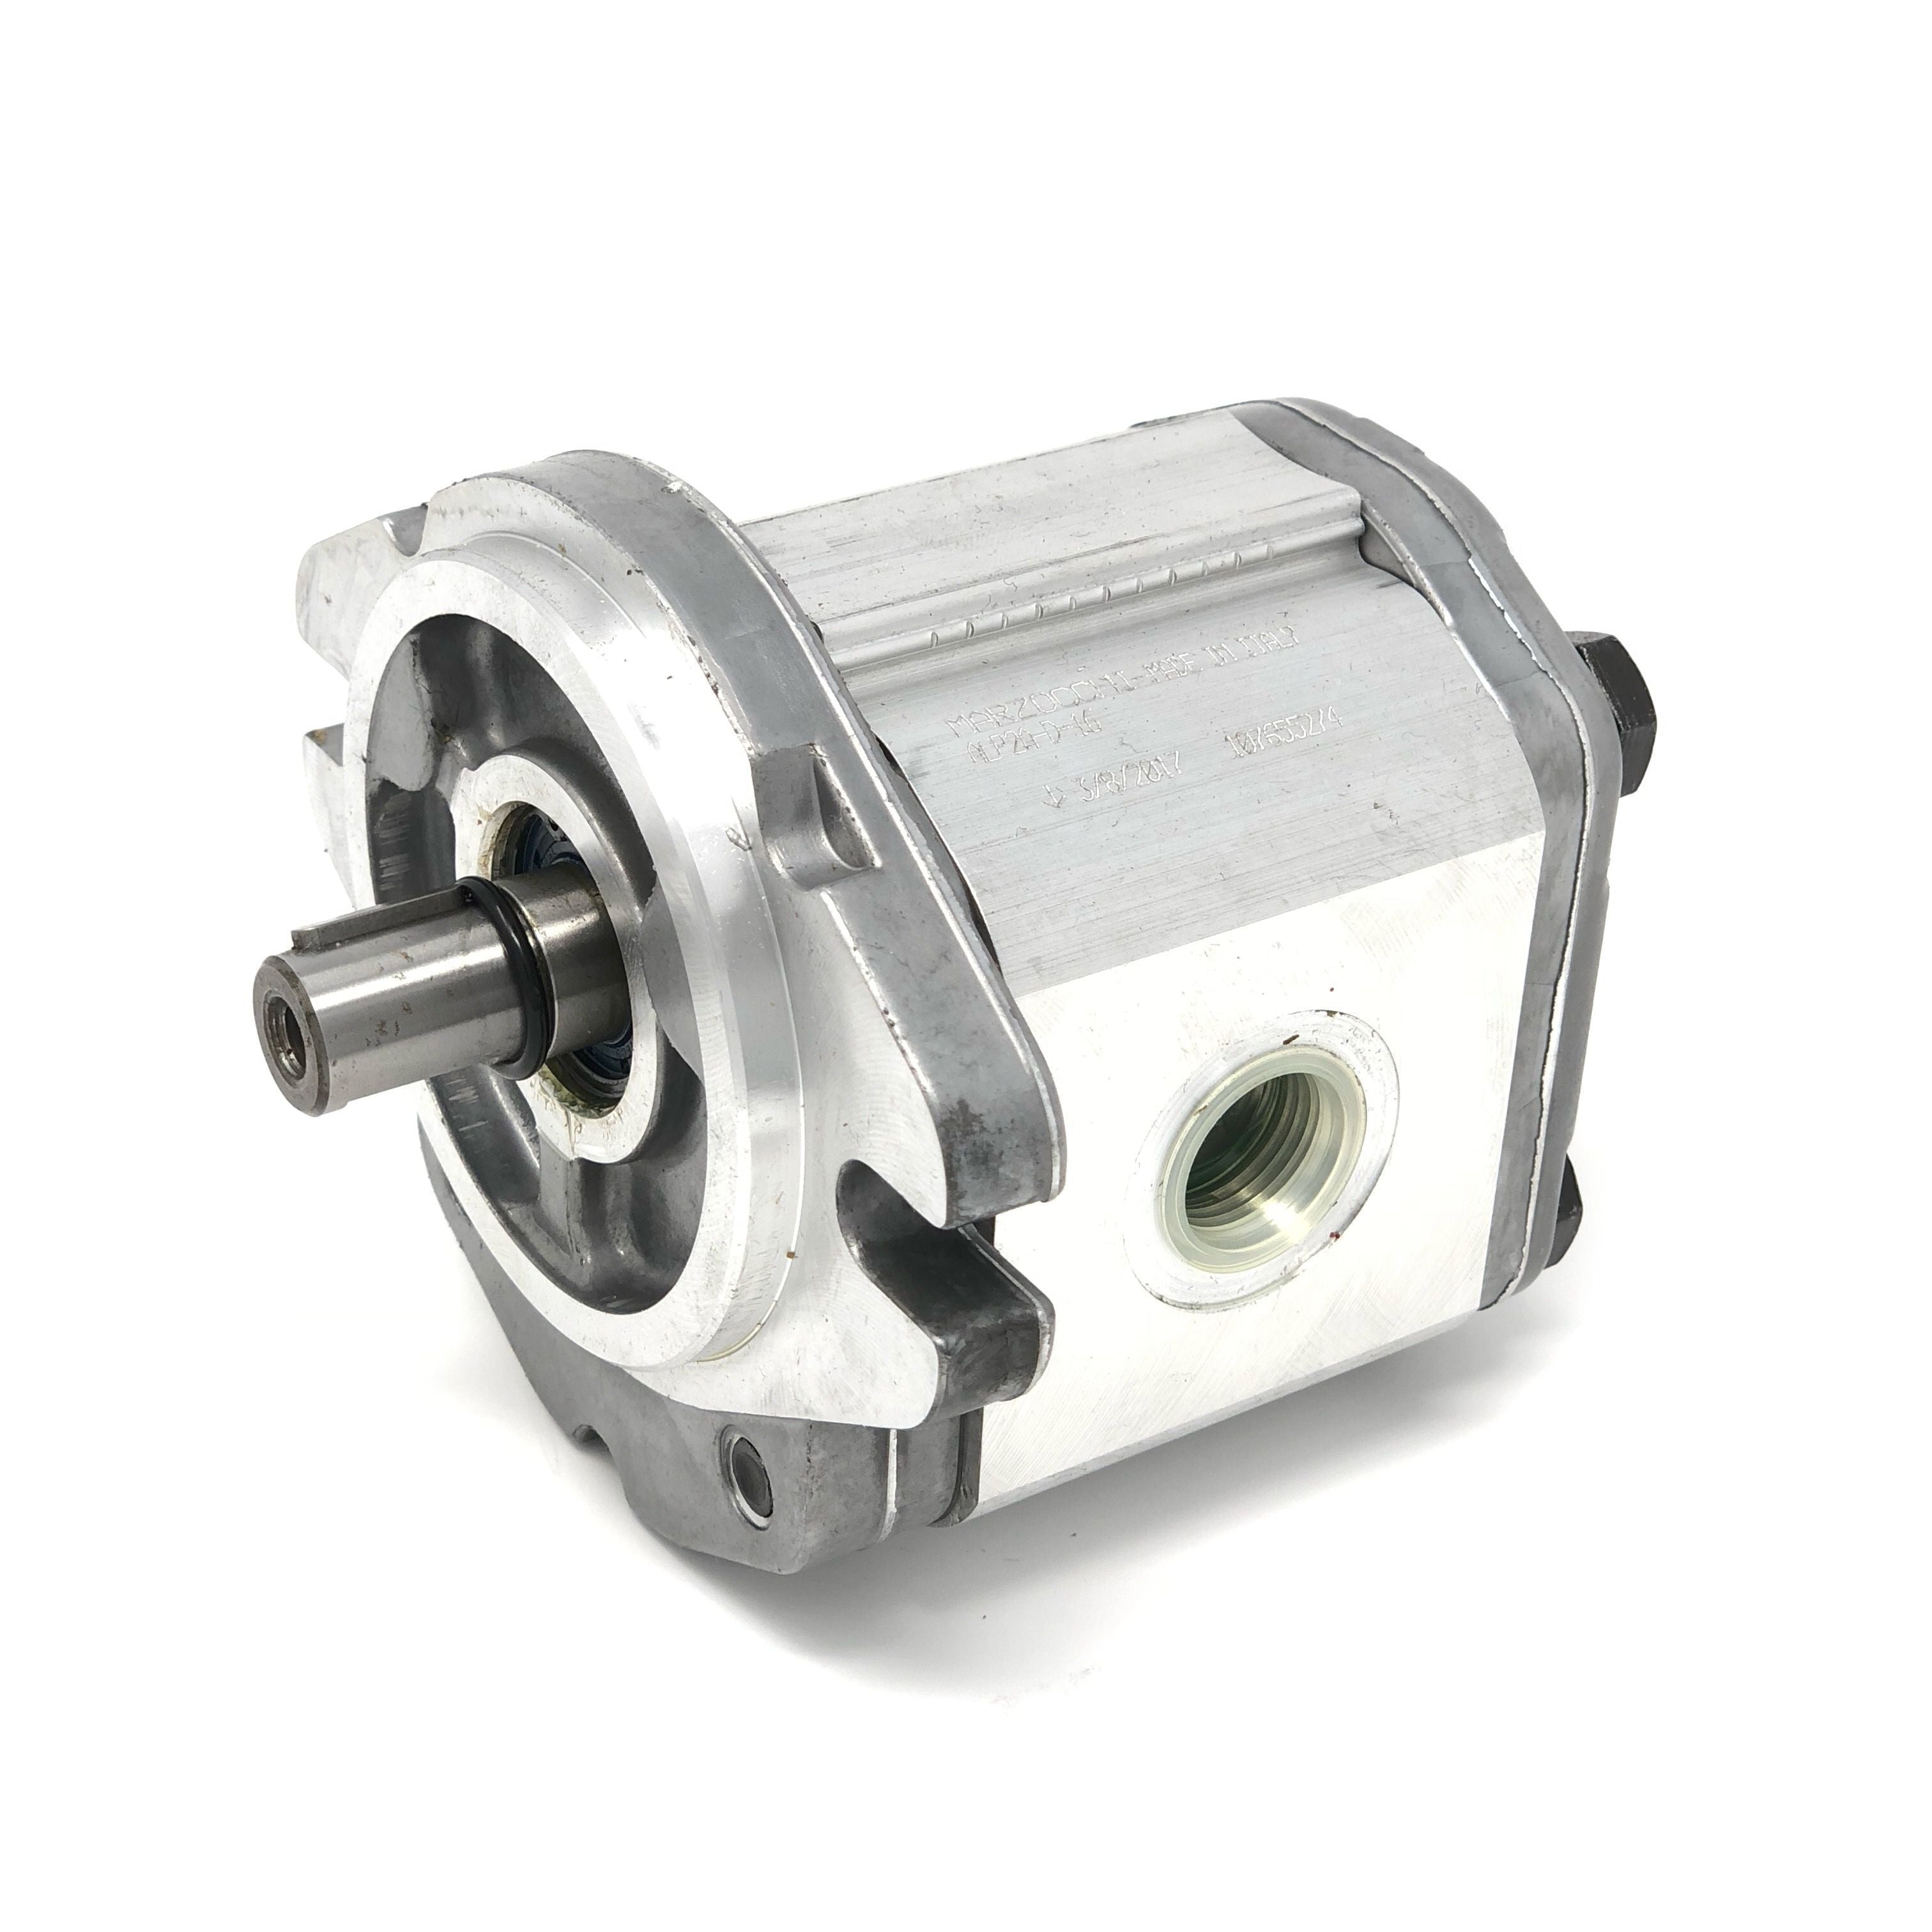 ALP1A-D-2 : Marzocchi Gear Pump, CW, 1.4cc (0.0854in3), 0.67 GPM, 3625psi, 6000 RPM, #8 SAE (1/2") In, #6 SAE (3/8") Out, Keyed Shaft 1/2" Bore x 1/8" Key, SAE AA 2-Bolt Mount